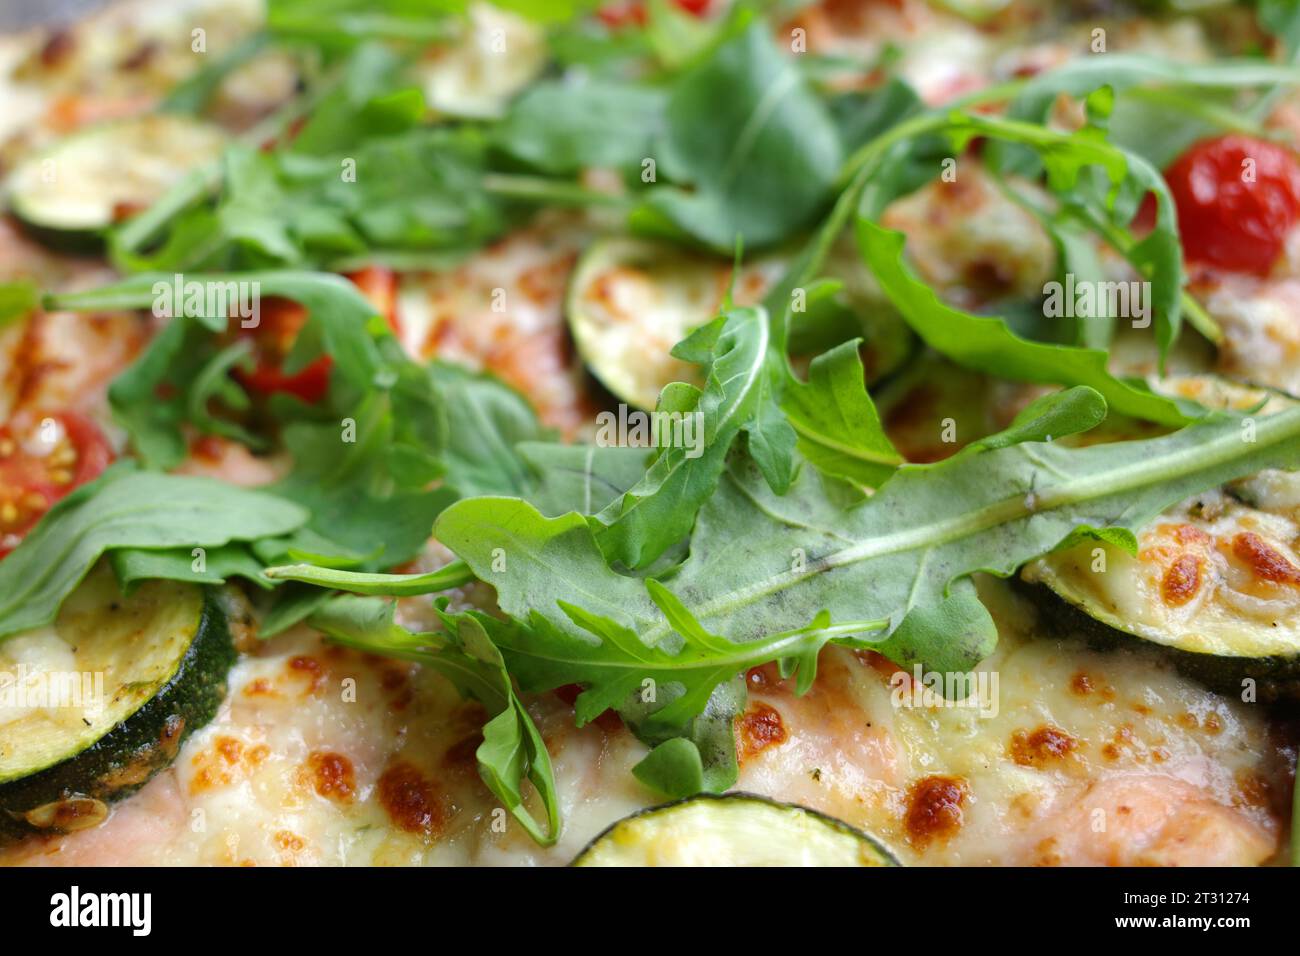 Delicious pizza with tomatoes, arugula leaves, zucchini and salmon Stock Photo